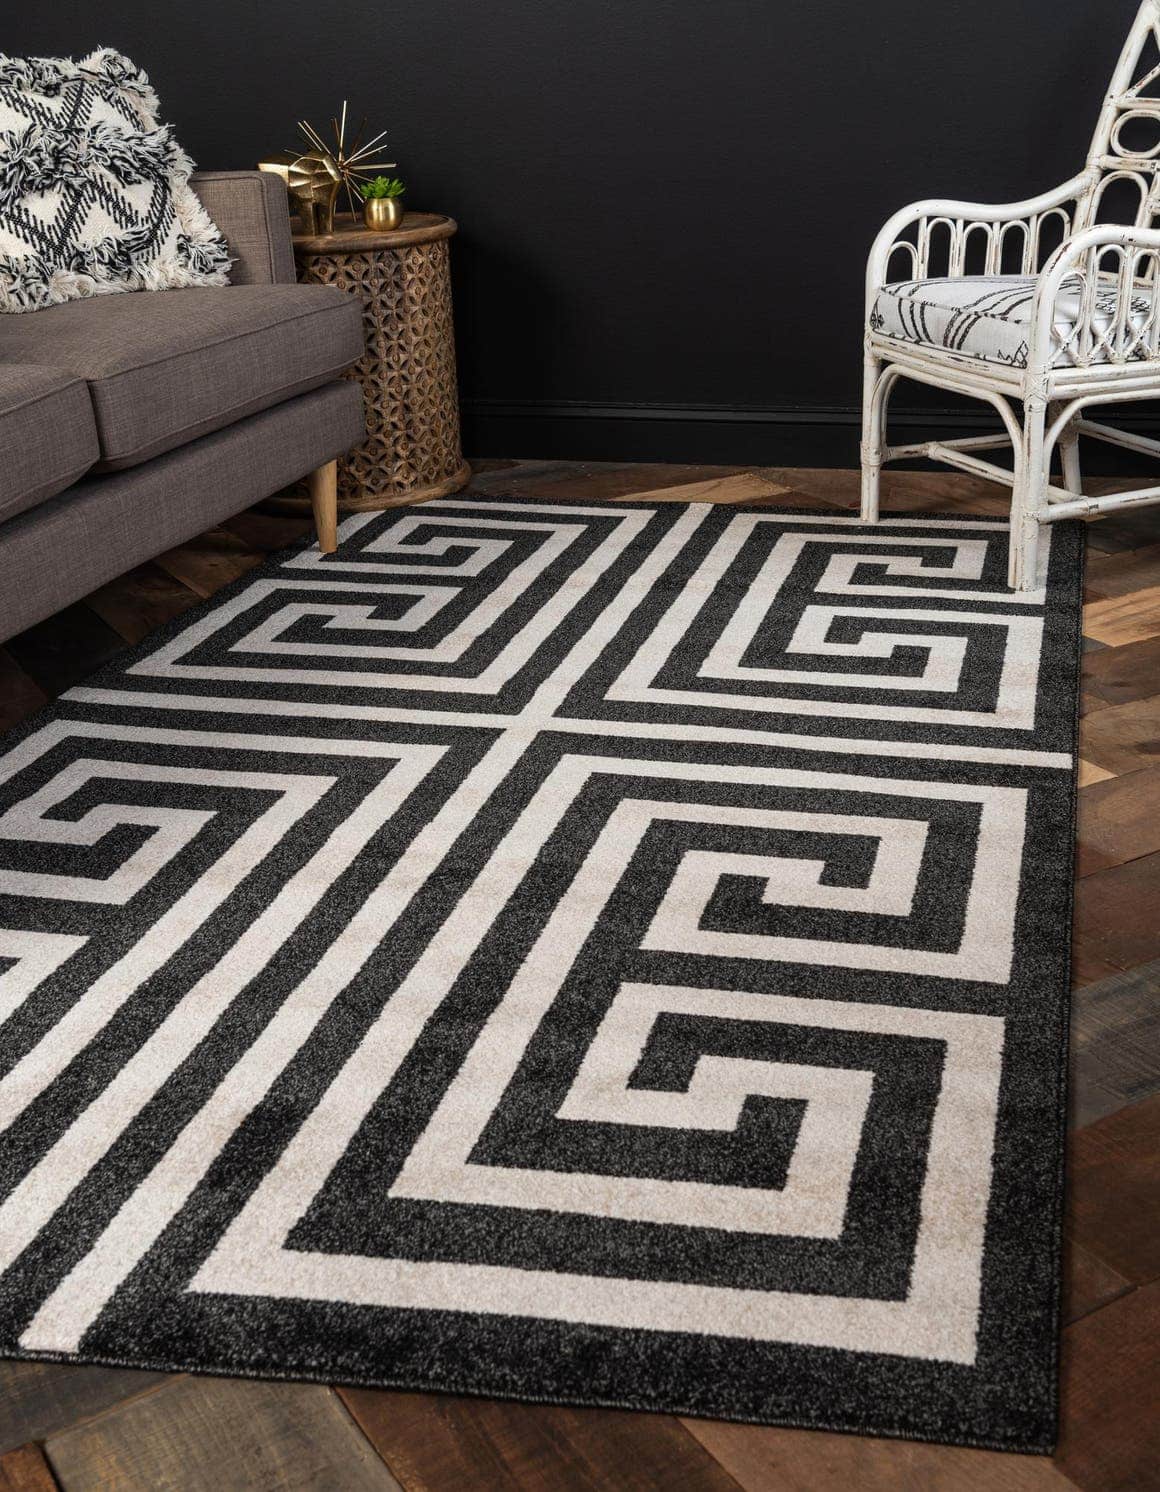 25 Gorgeous Rugs That Go With Grey Couches, White And Grey Area Rug For Living Room